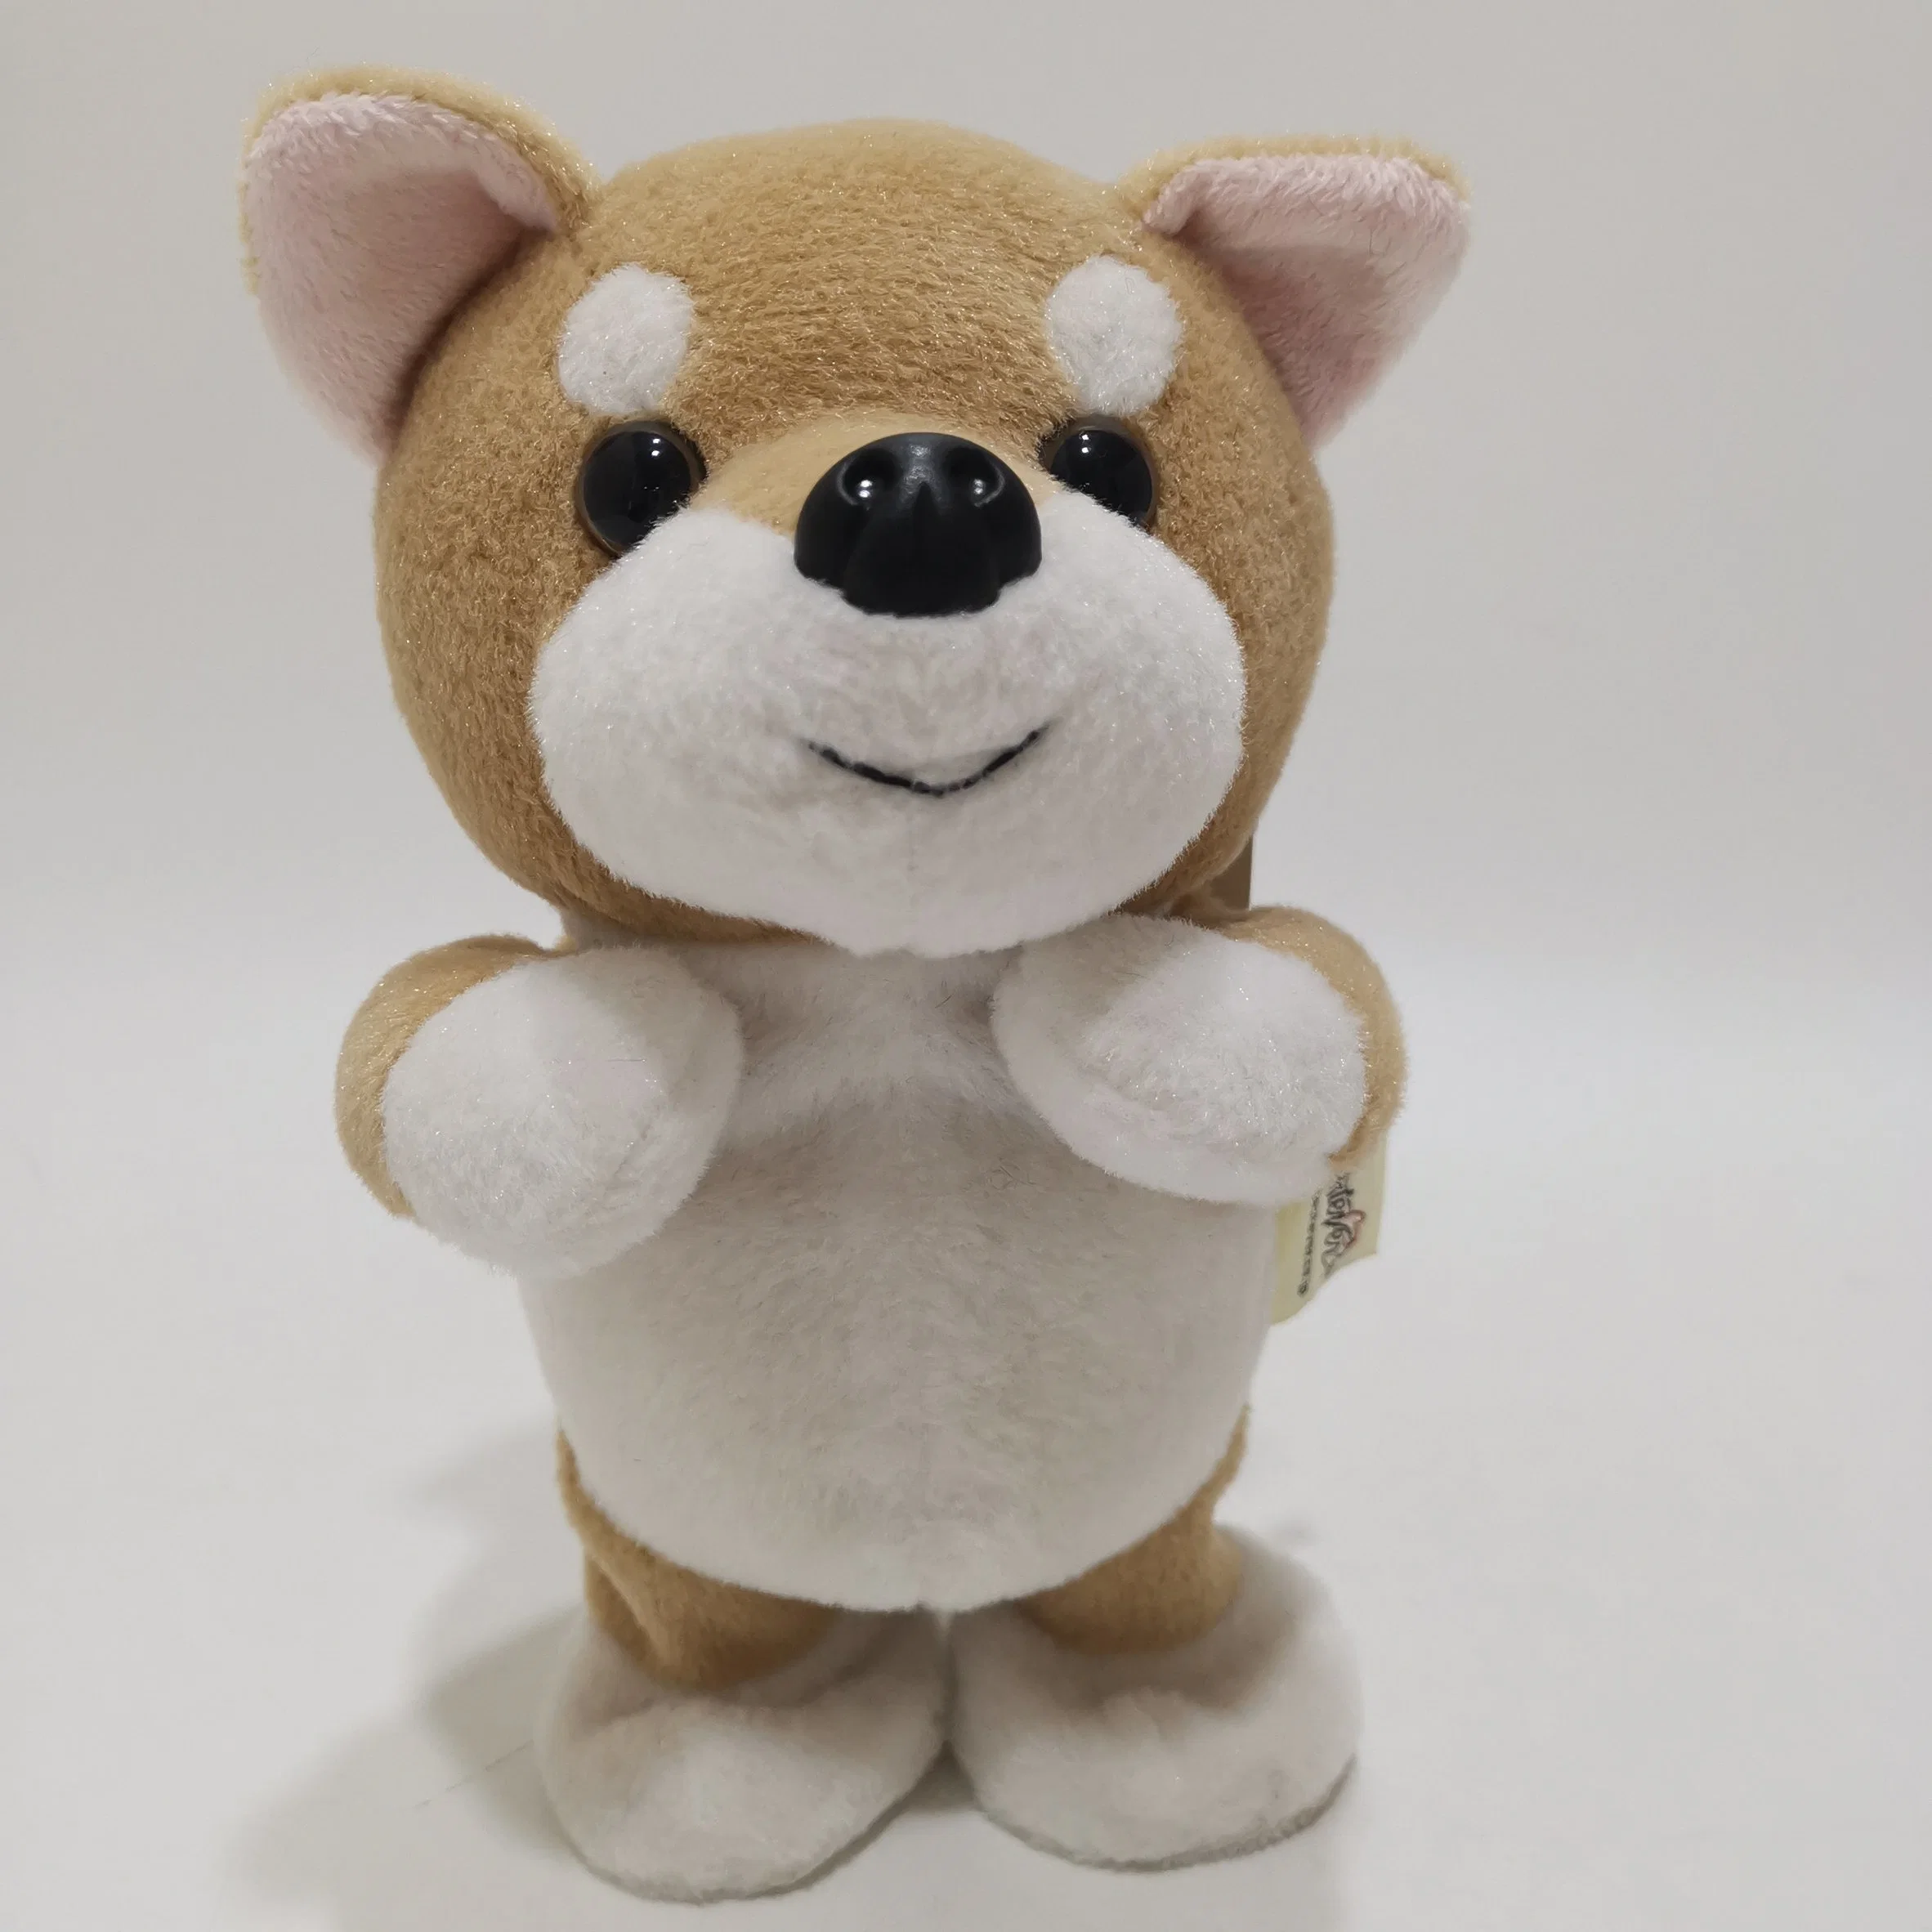 Walking and Talking Animated Plush Dog Electrical Toys for Kids